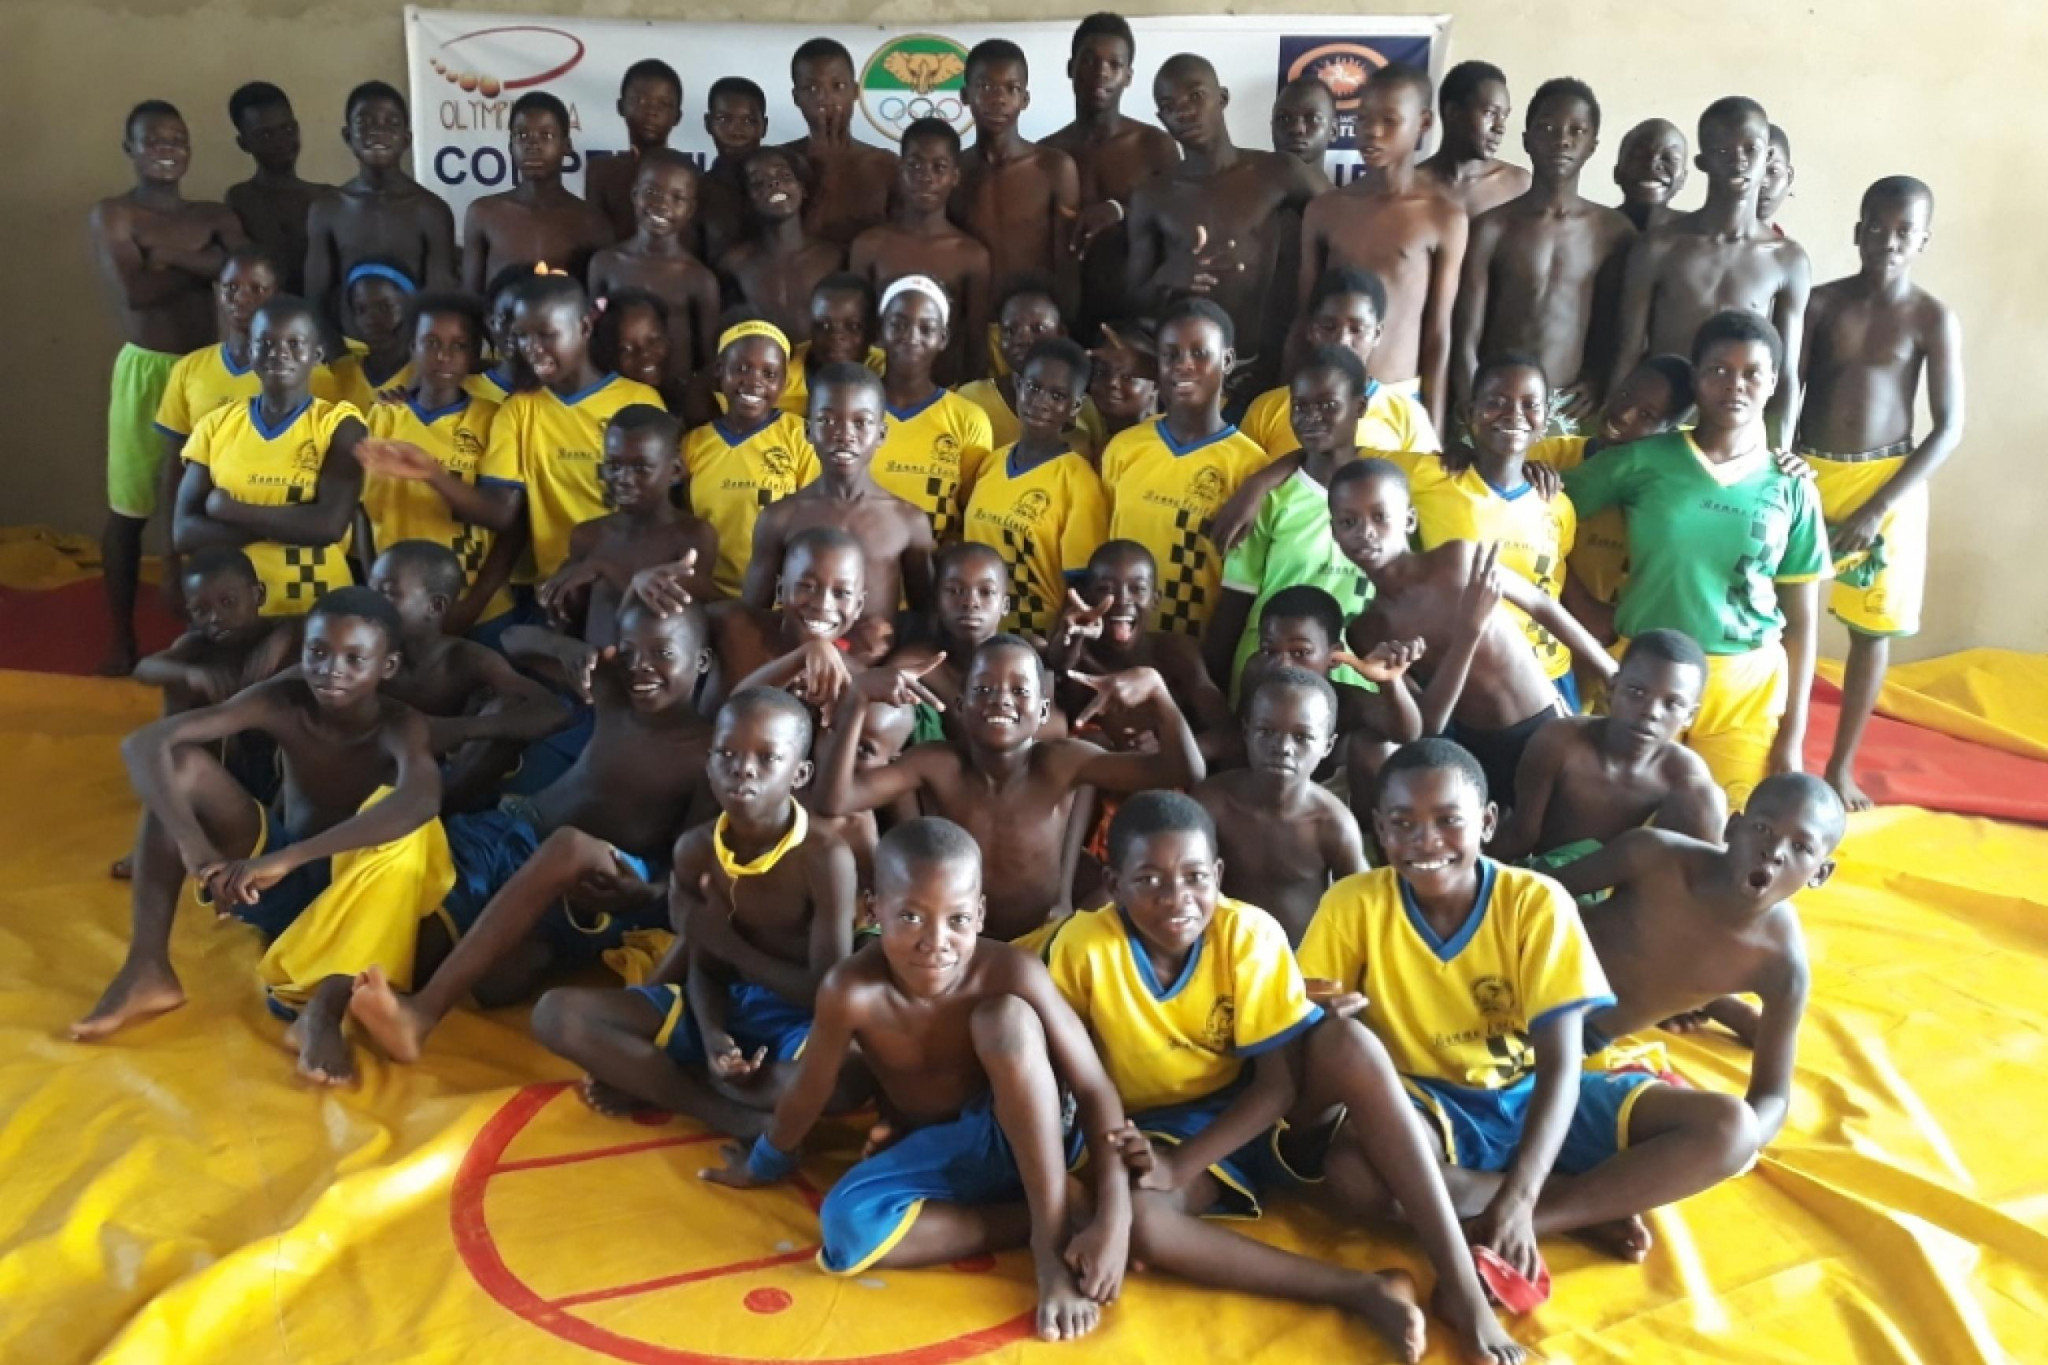 More than 2,000 students took part in Ivory Coast's largest ever wrestling event ©UWW